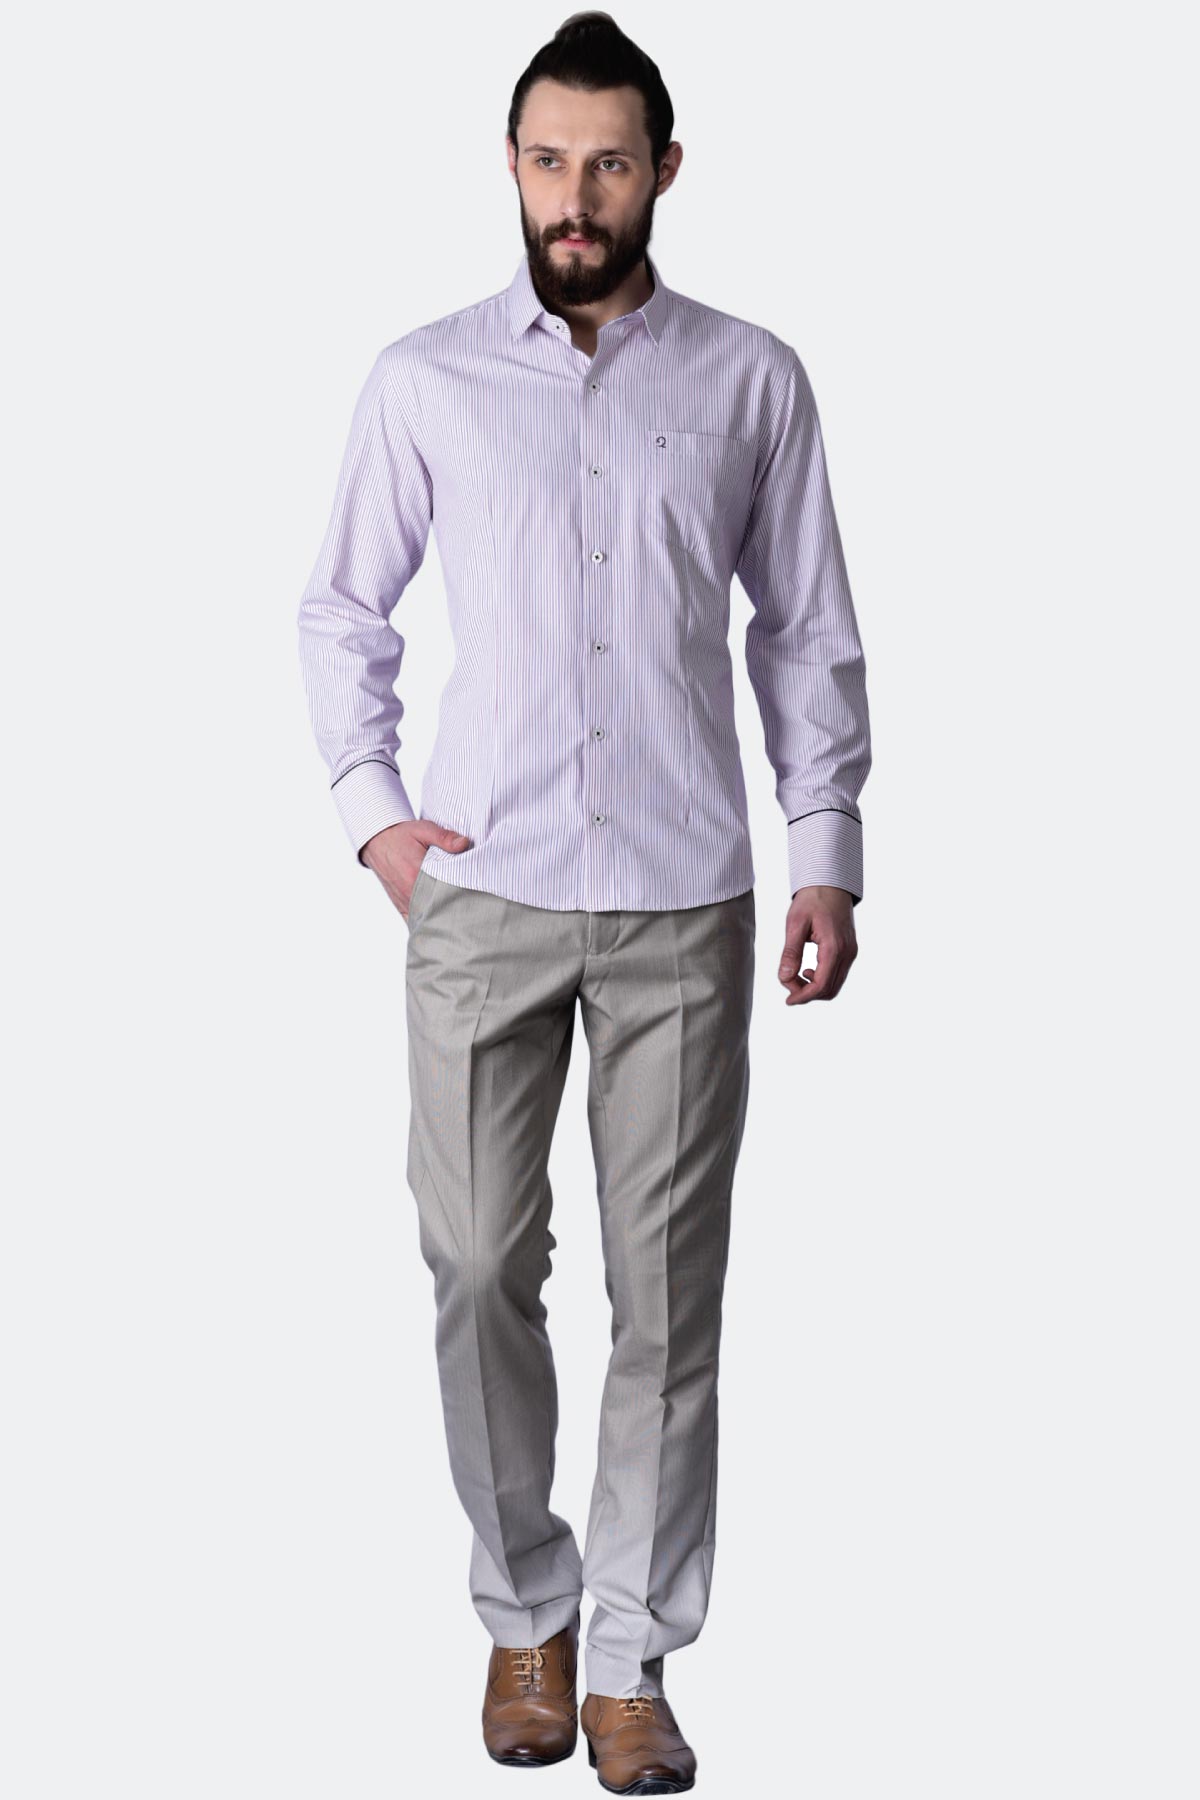 Cuff Piping Shirt - Quontico